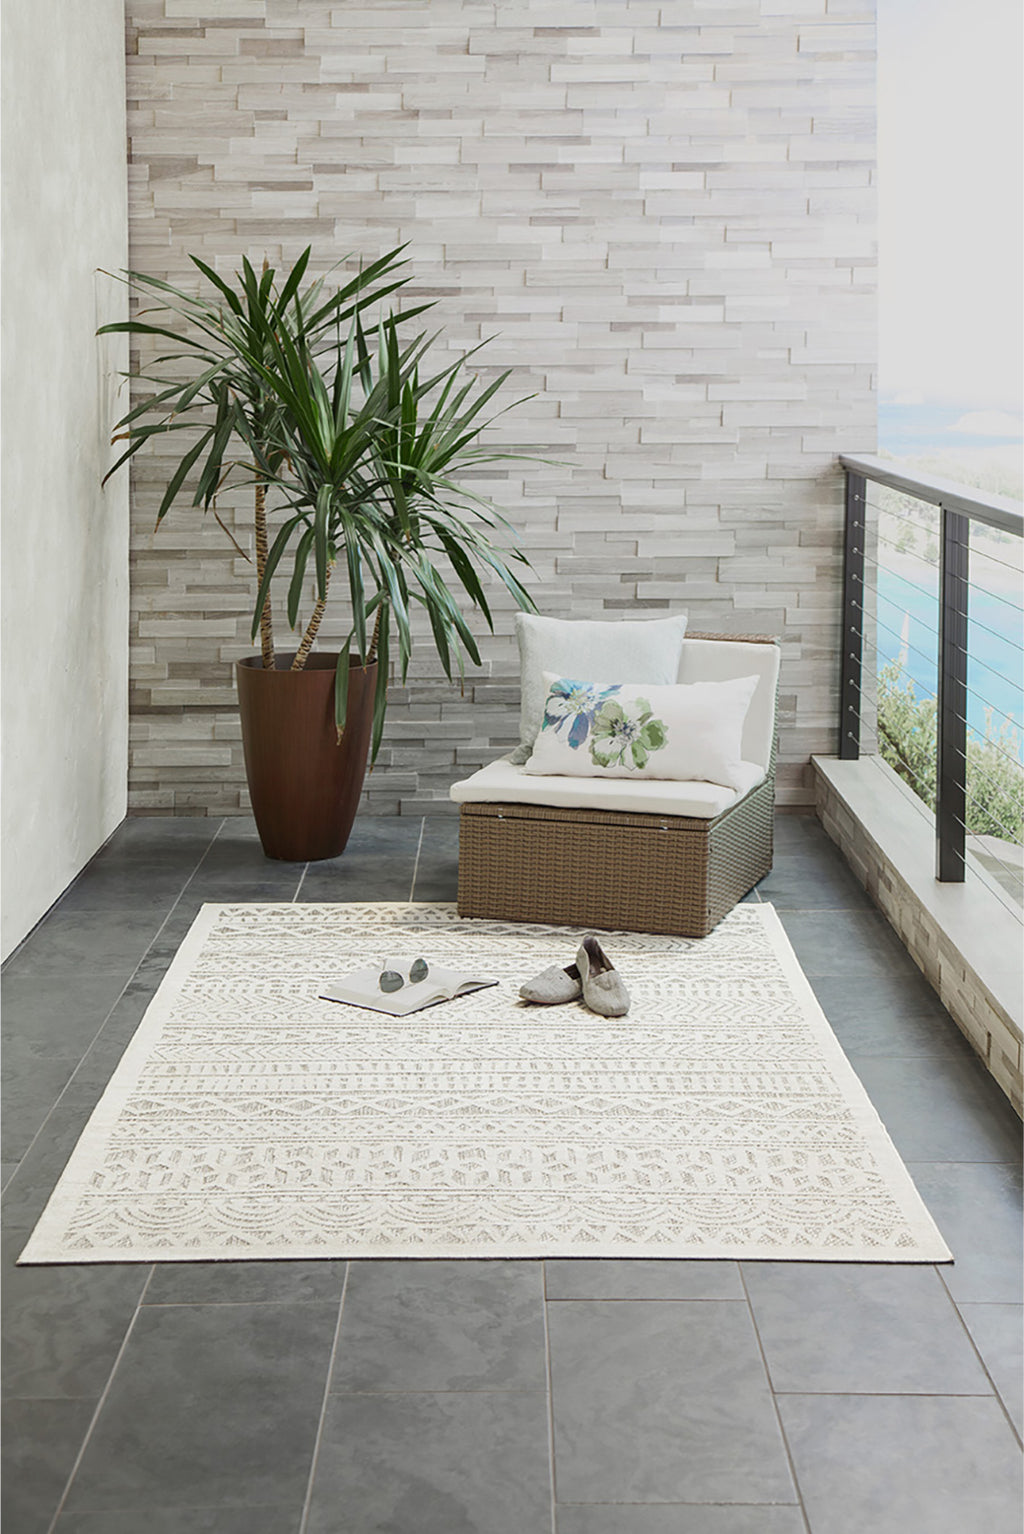 Trans Ocean Rialto 7036/12 Tribal Stripe Ivory Area Rug by Liora Manne Room Scene Image Feature